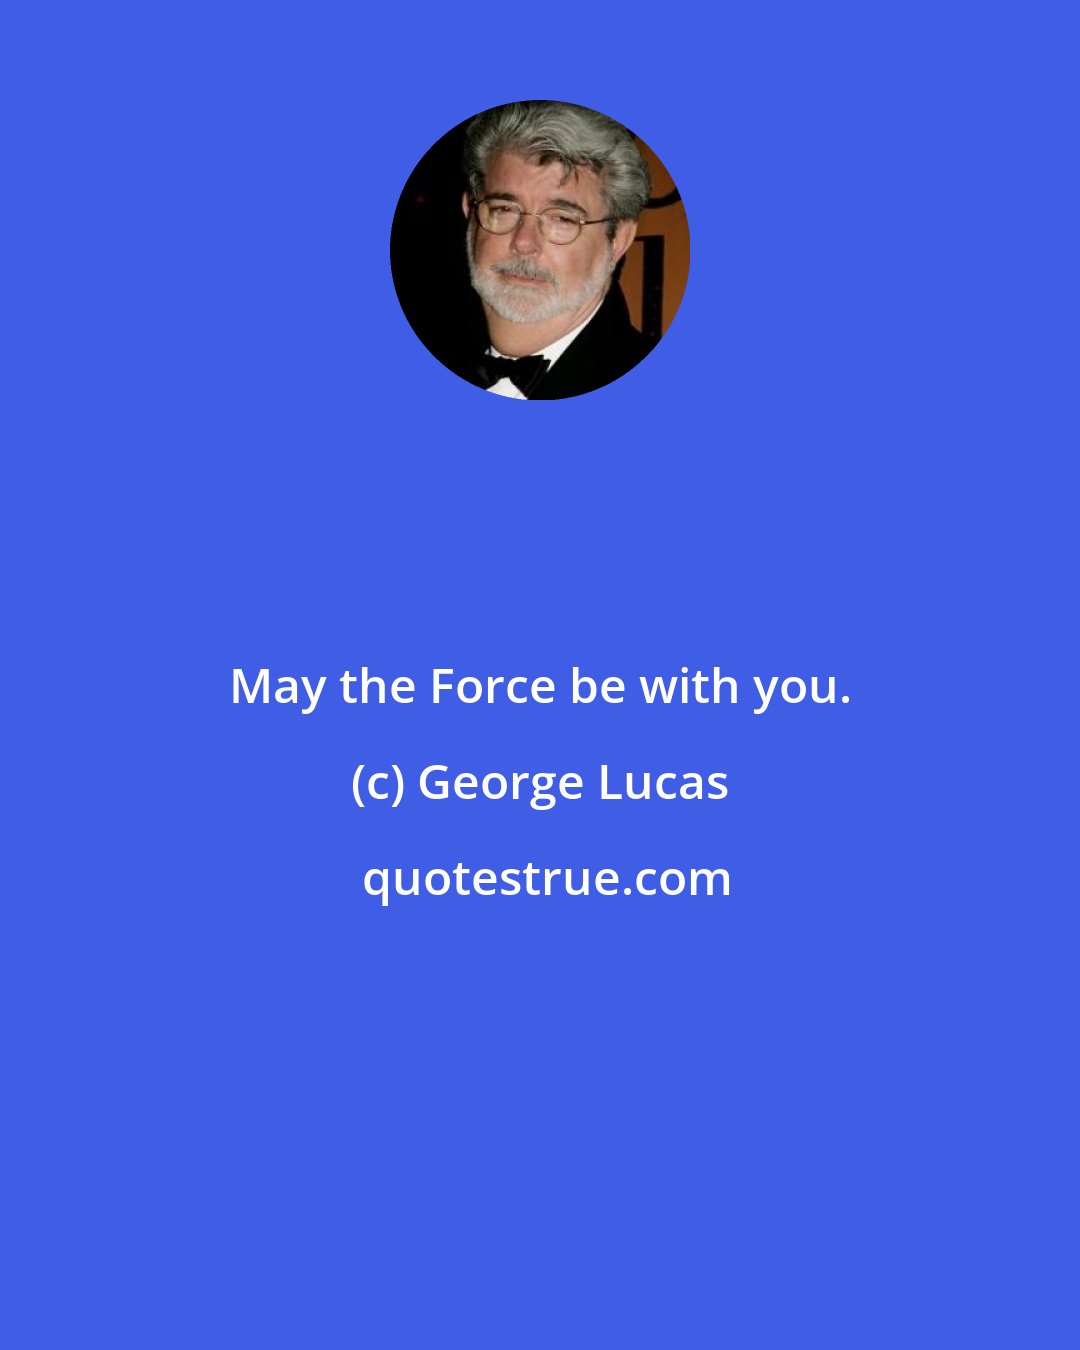 George Lucas: May the Force be with you.